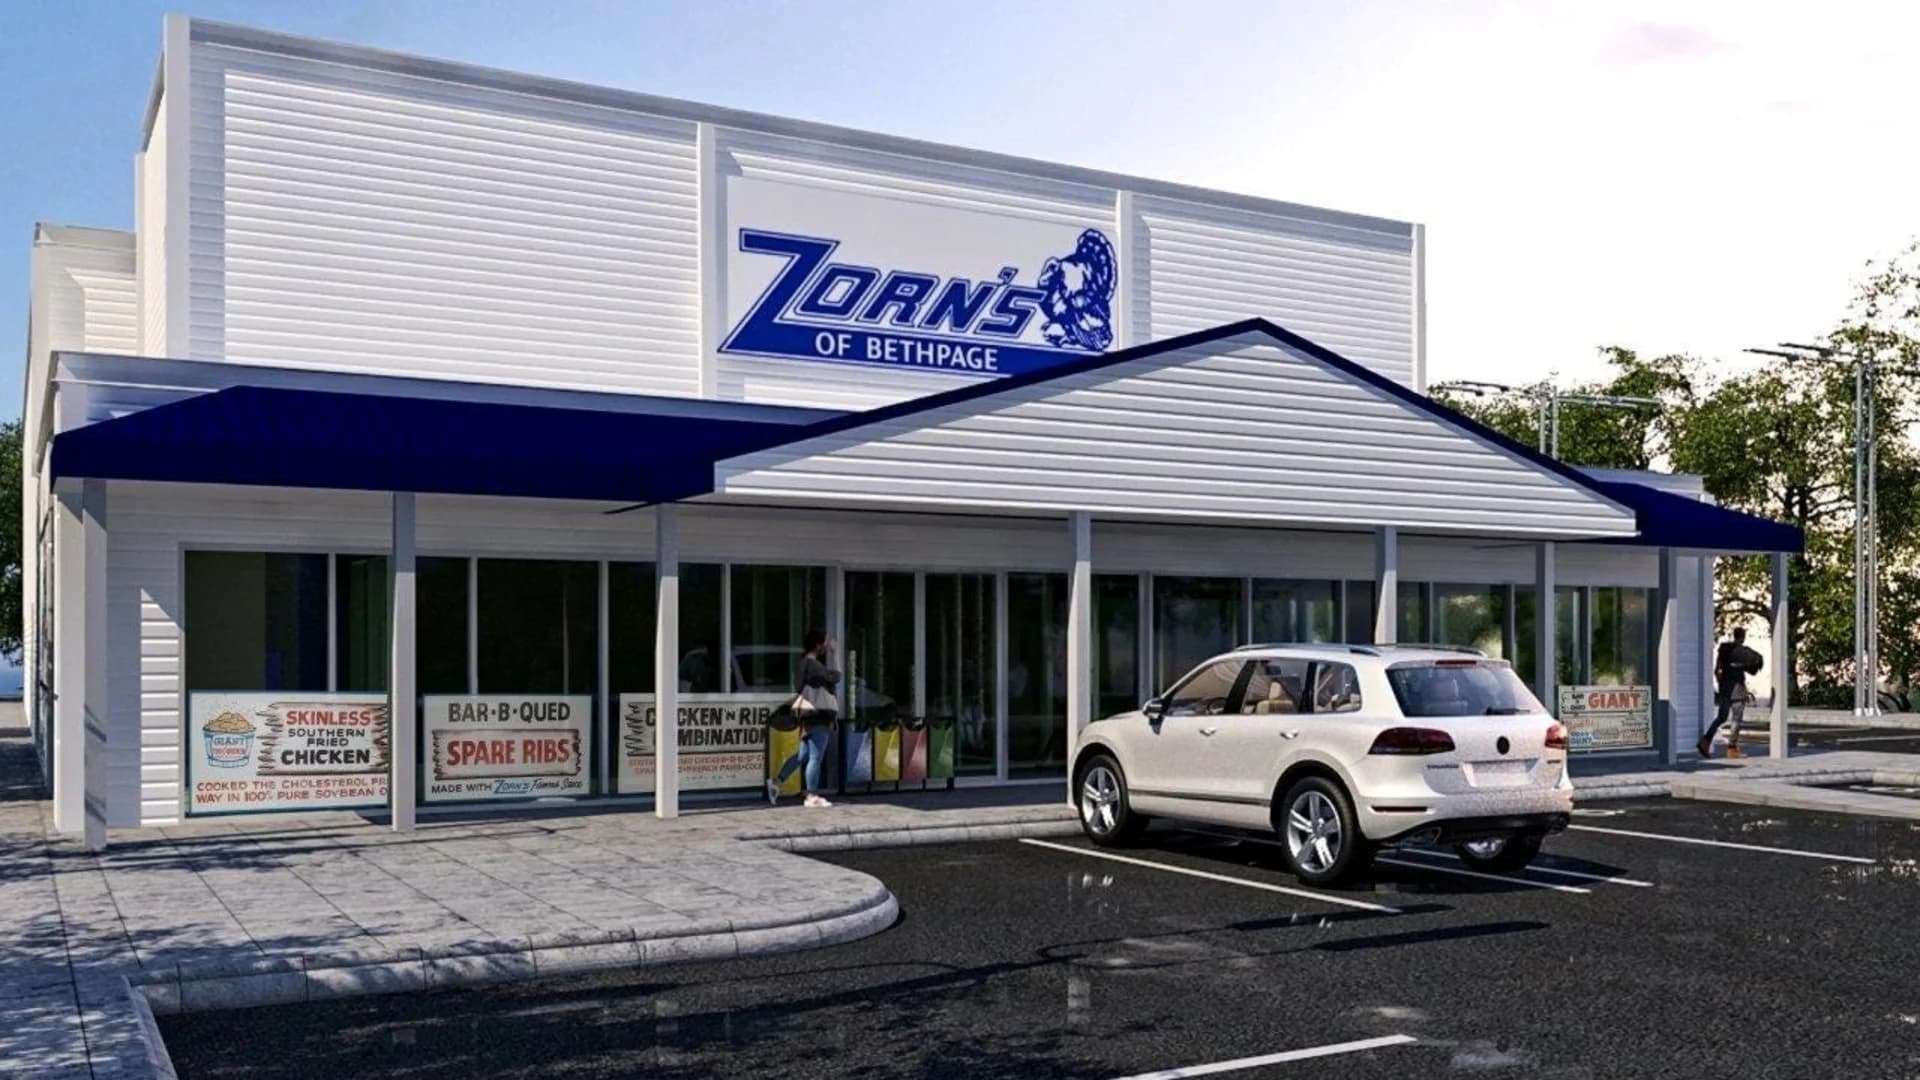 Zorn’s of Bethpage releases rendering of new store